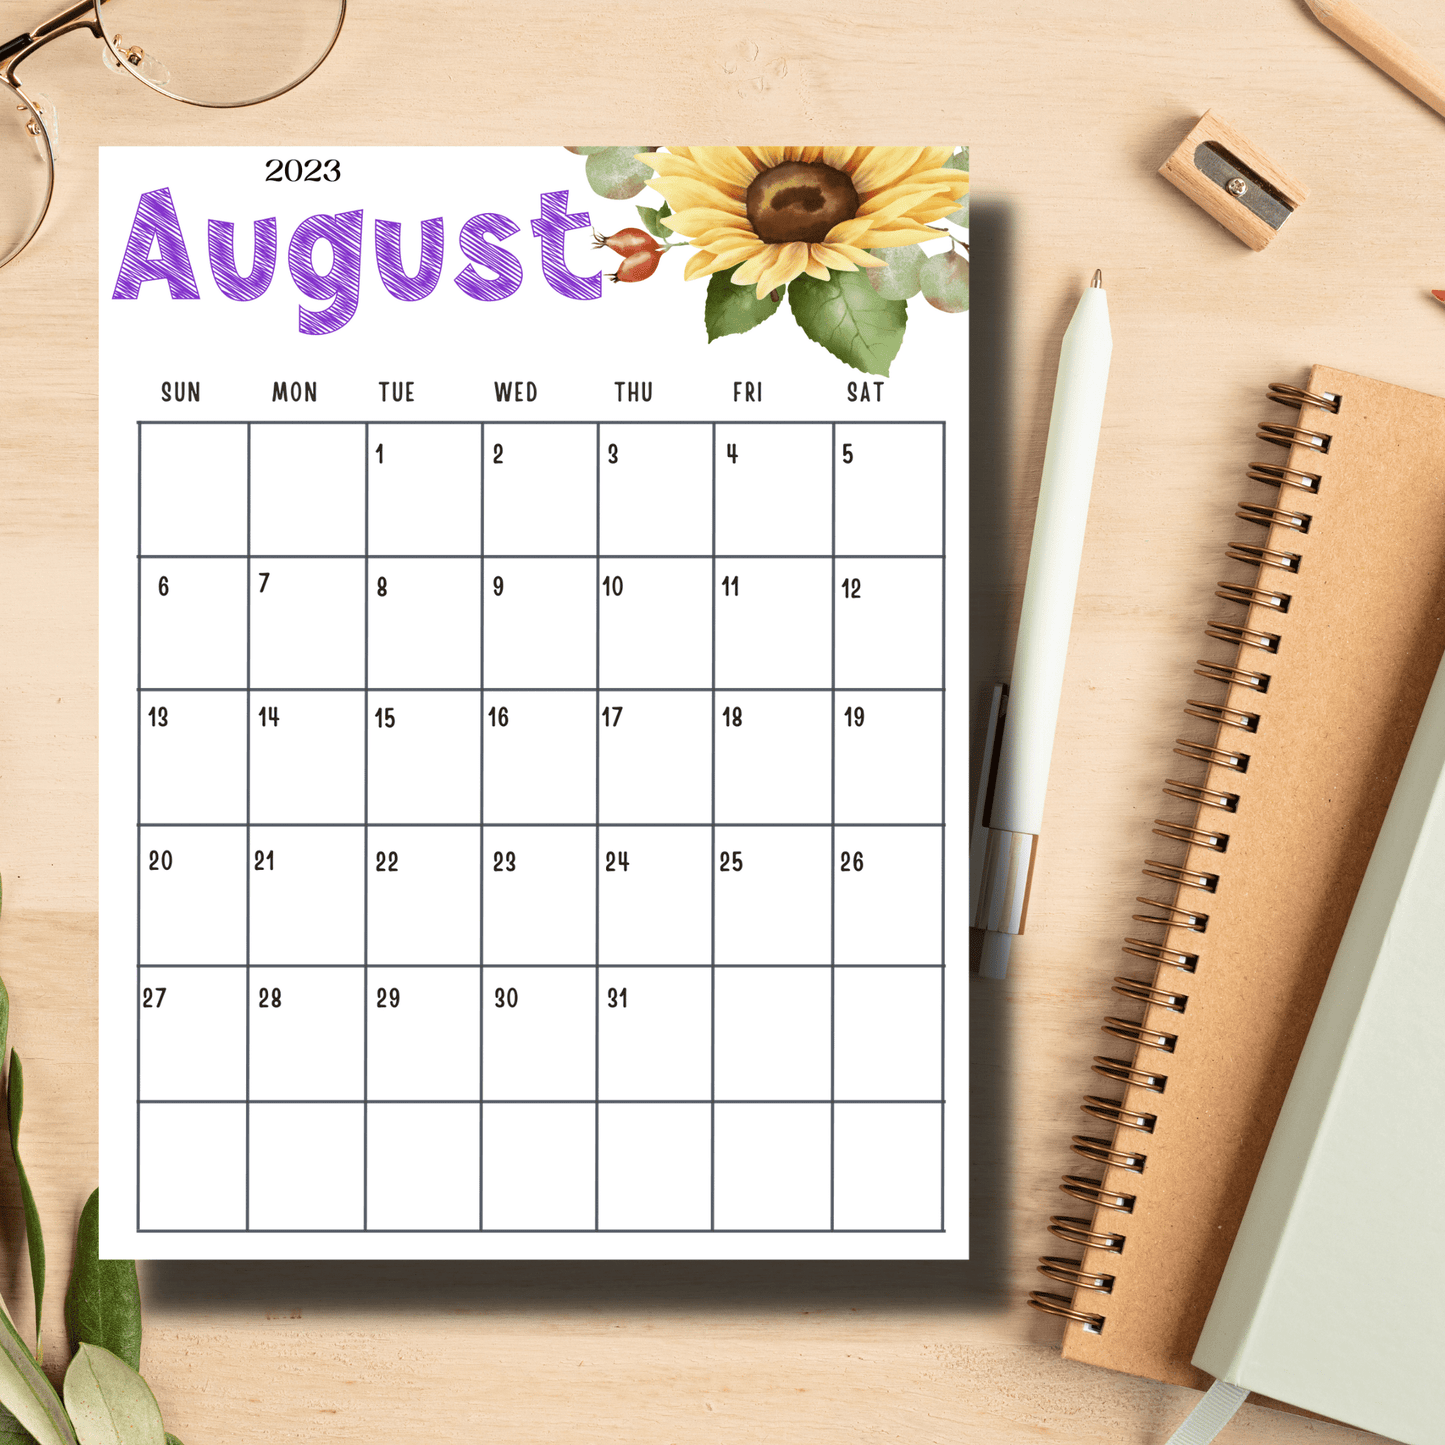 August 2023 Printable Calendar - Free Cute A4 8.5x11 in Size: Engaging Kids' Digital Planner - Instant Download Available in A4 | Download Now | Sarsari Creations